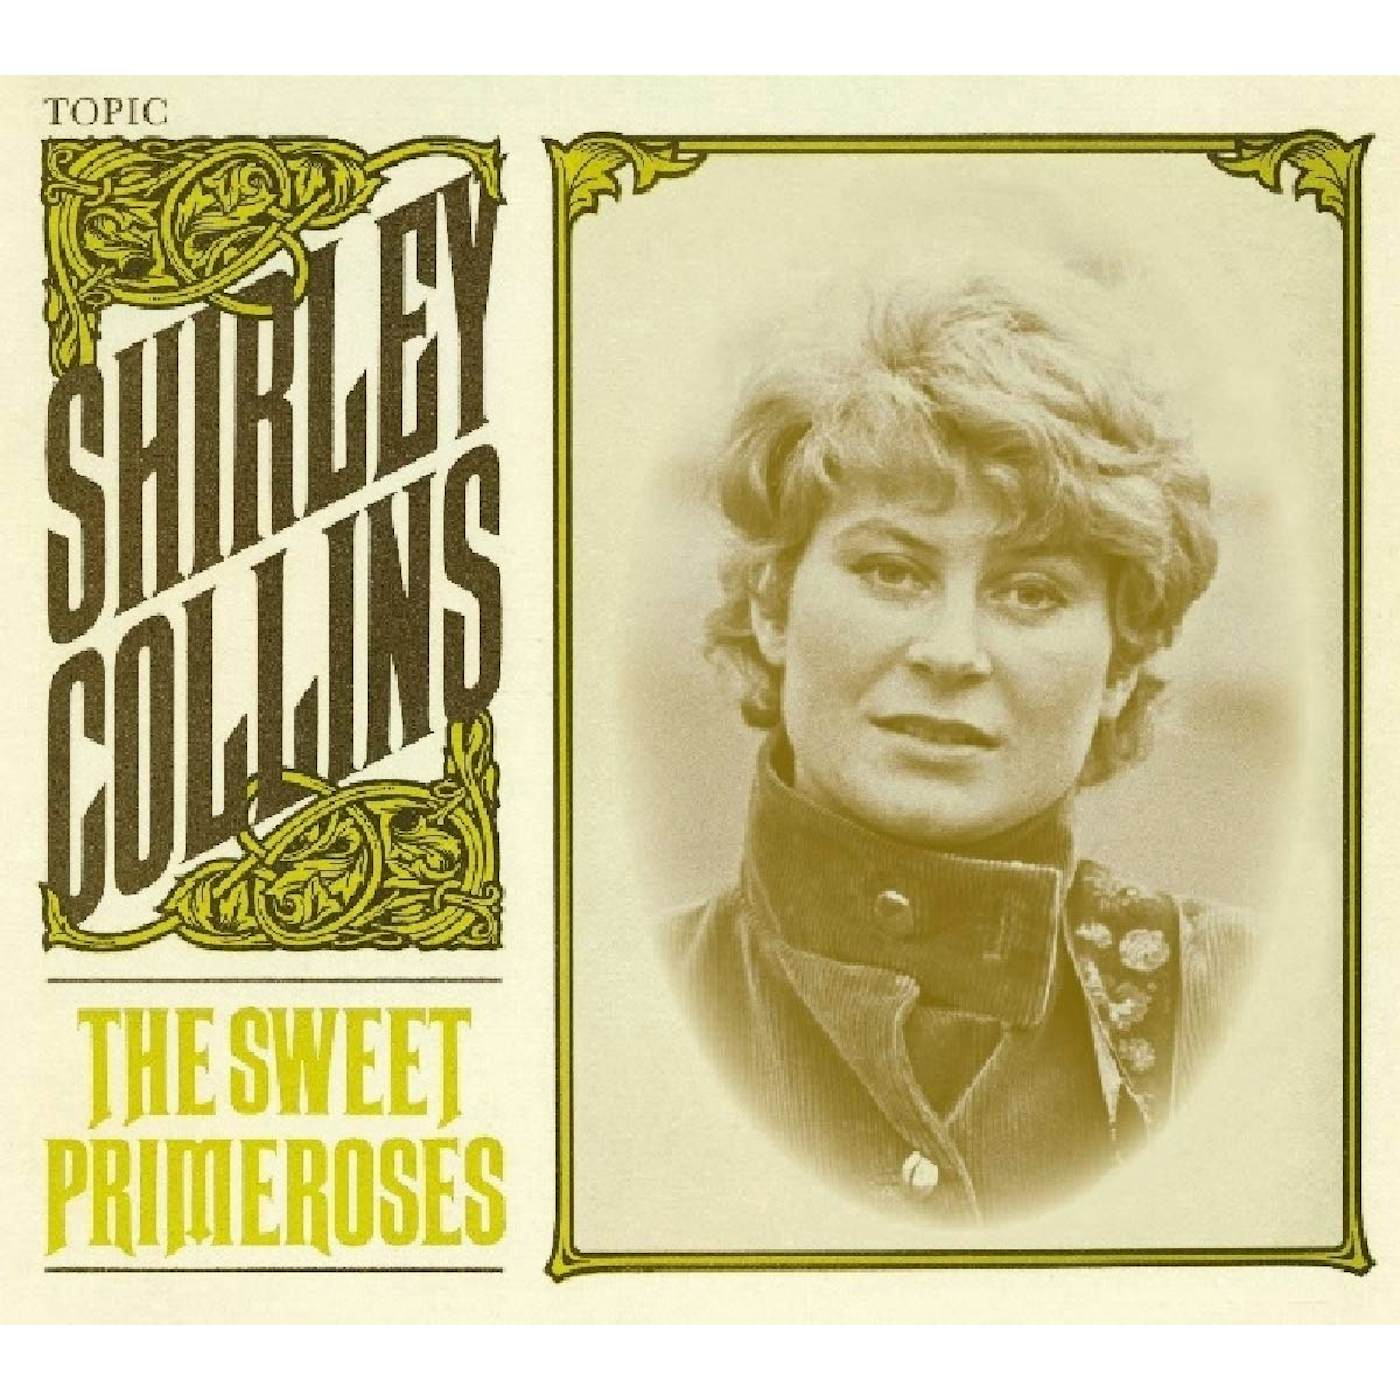 Shirley Collins SWEET PRIMEROSES CD